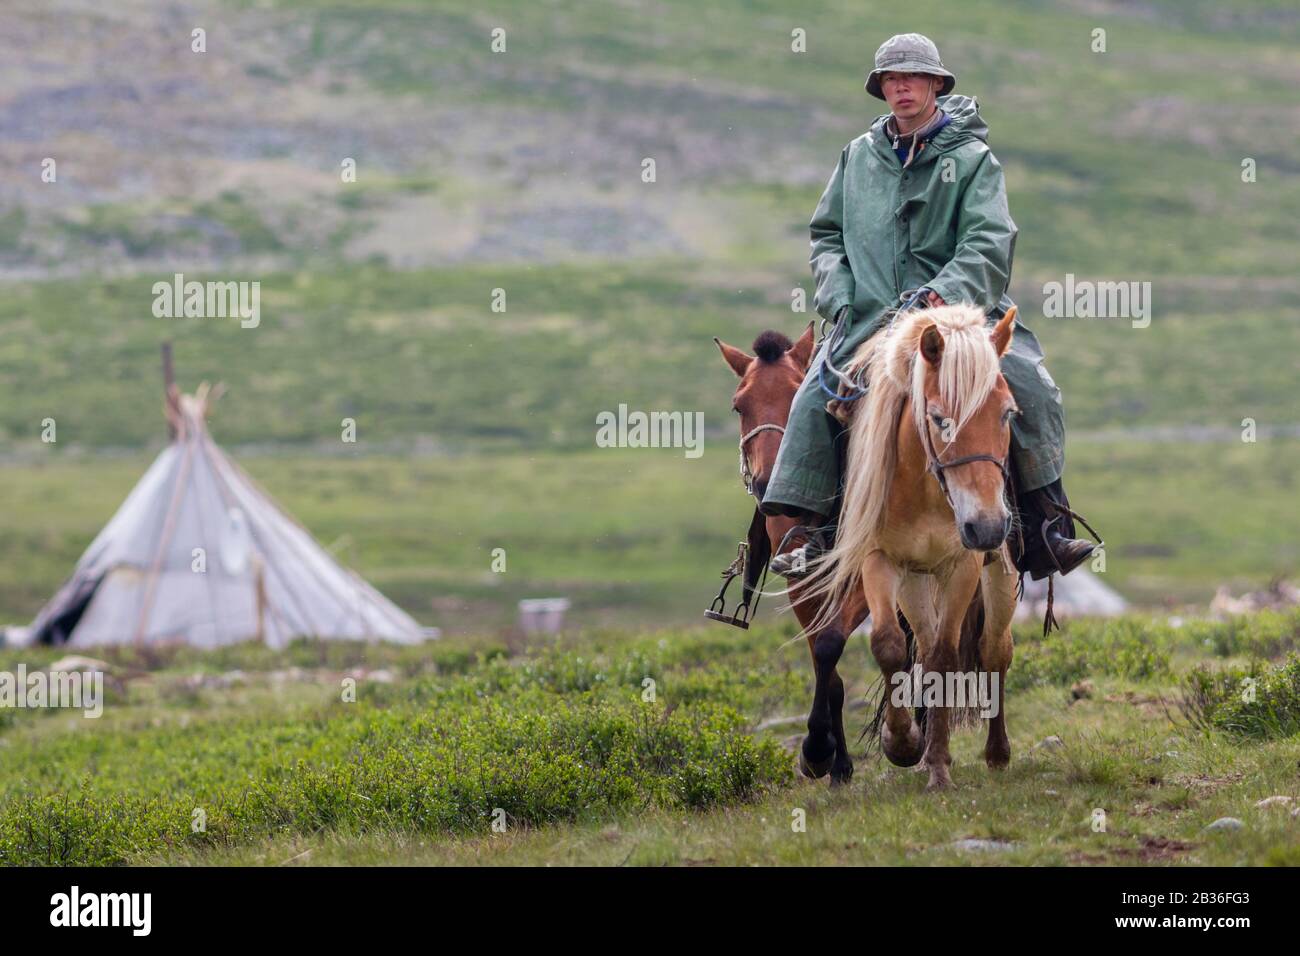 Mongolia, Khovsgol province, near Tsagaannuur, West Taiga, Tsaatan guide riding a horse and traditionnal tent in the backgound, altitude 2210 meters, horse trekking and camping to meet the Tsaatan people Stock Photo